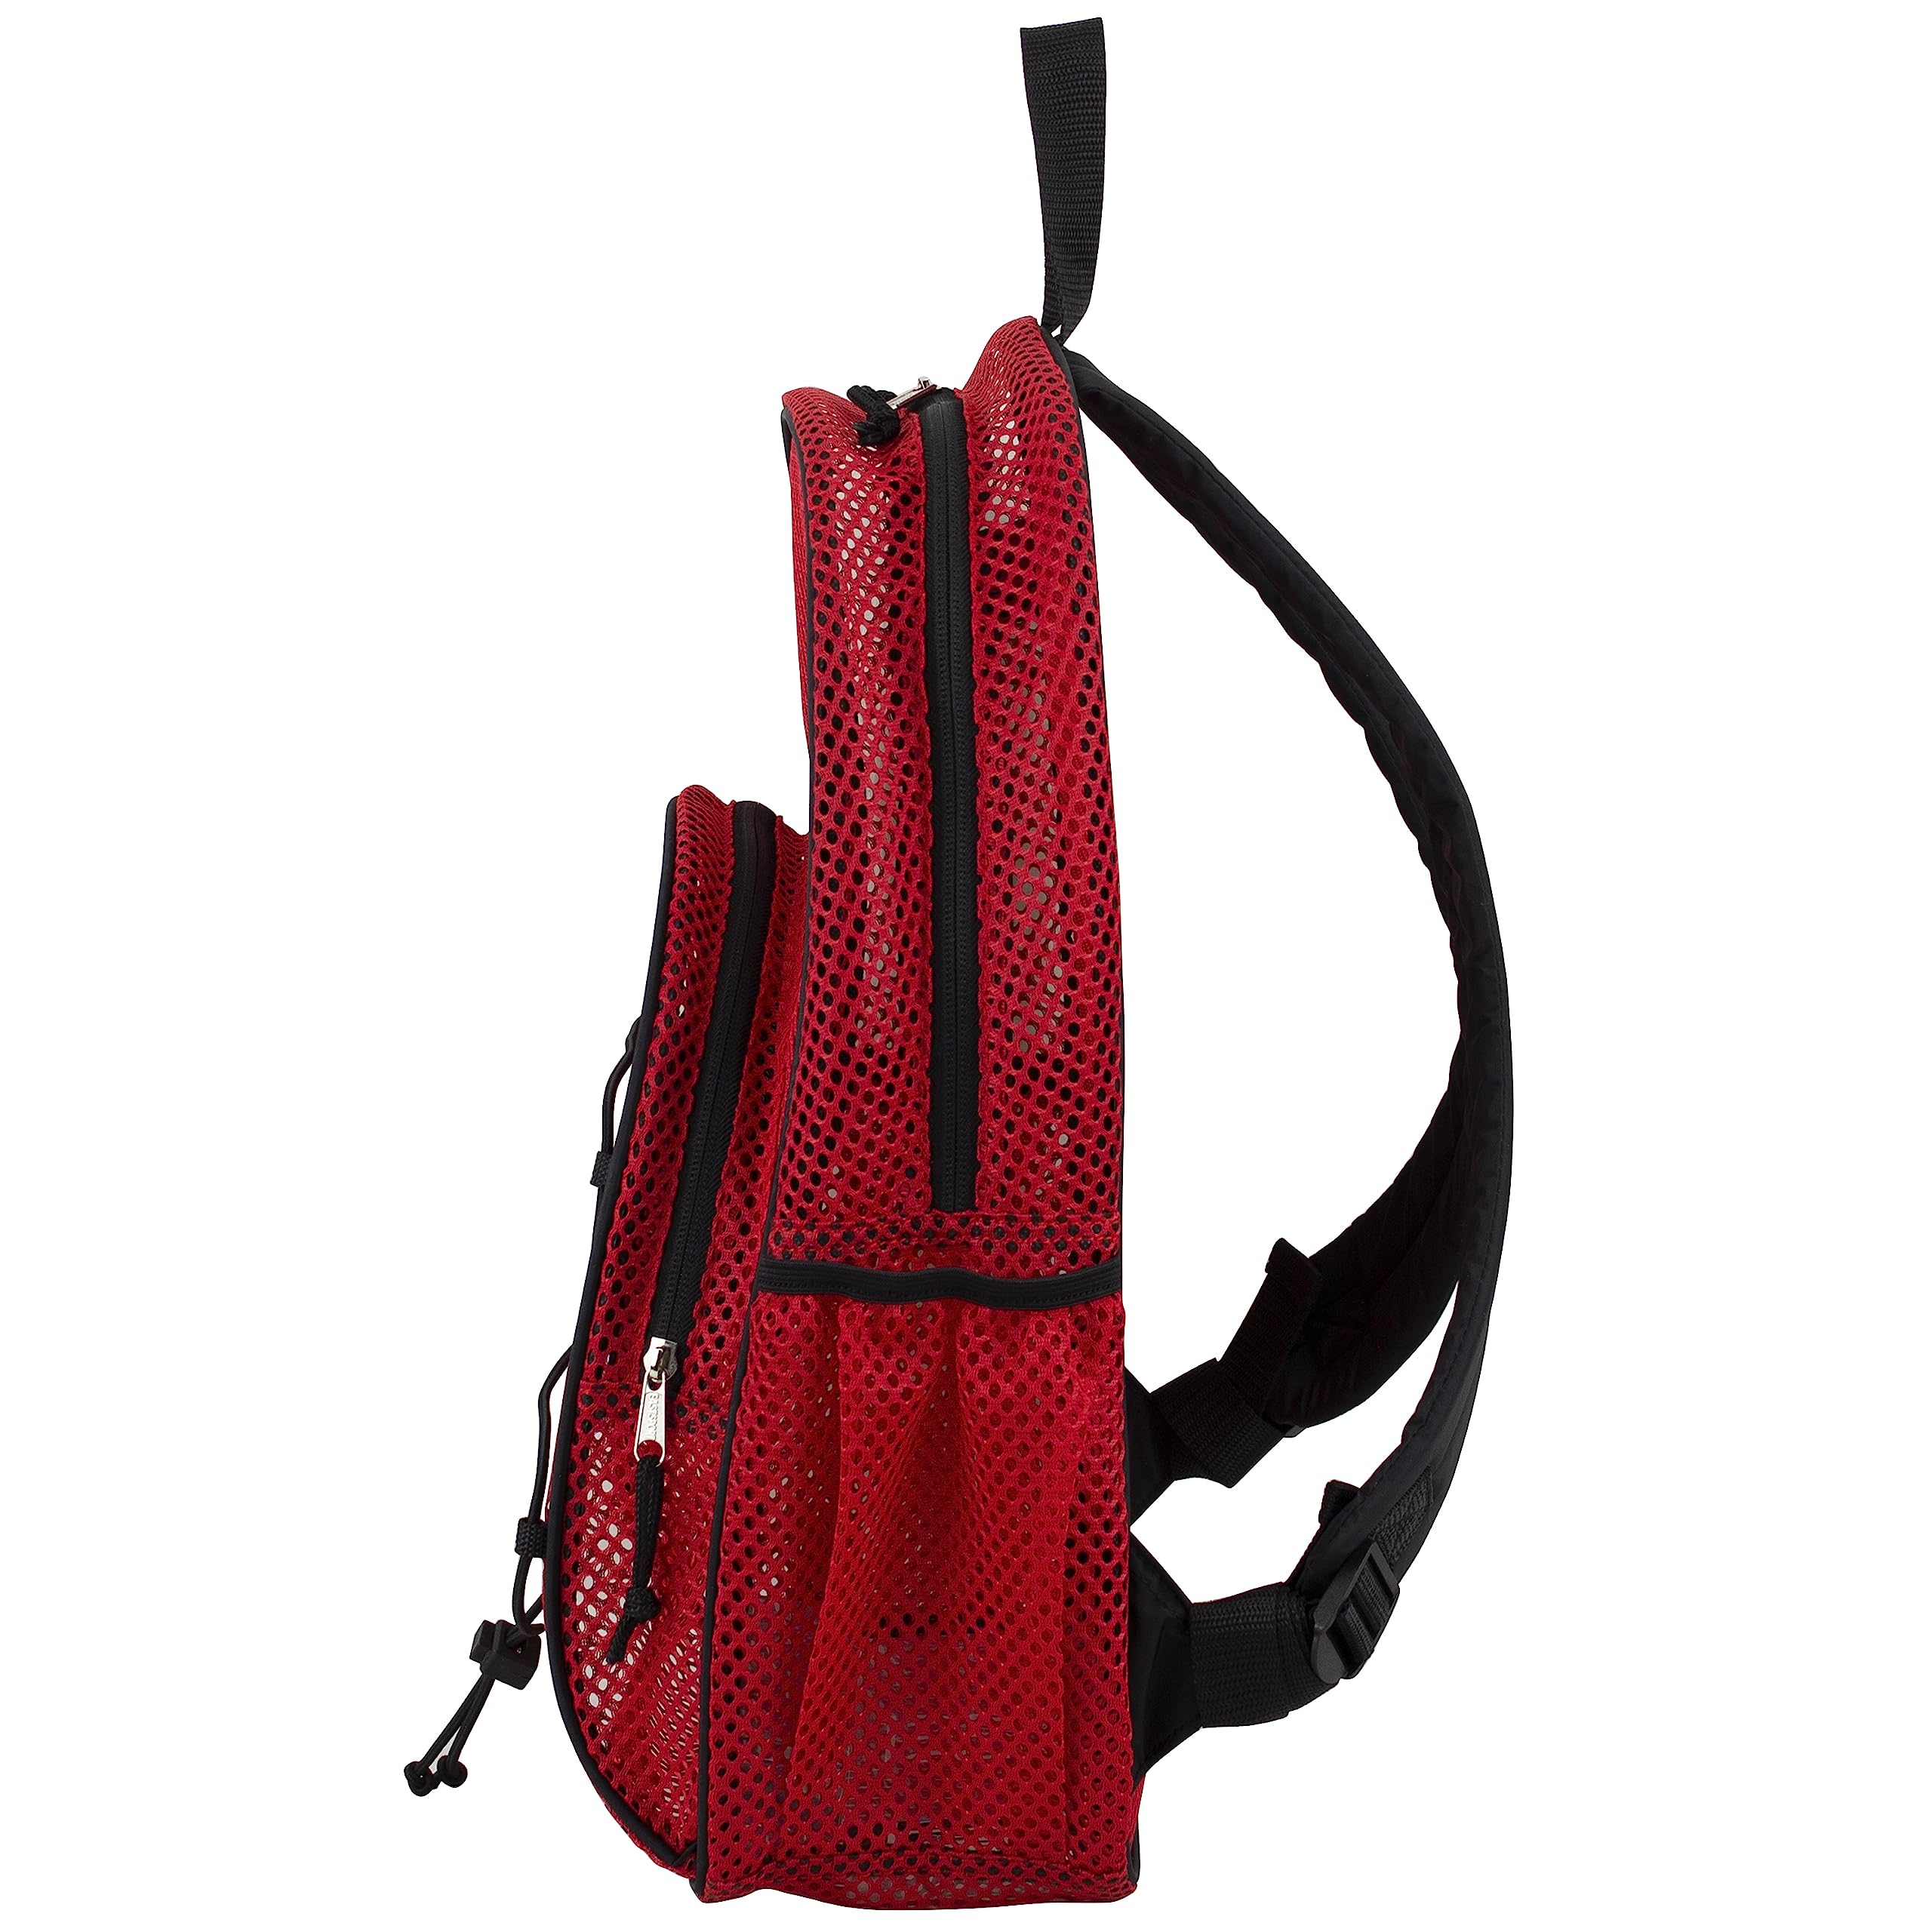 Eastsport Mesh Hiking Backpack Lightweight Bungee See Through for Travel, College, Swim, Gym Bag with Adjustable Padded Shoulder Straps, Red